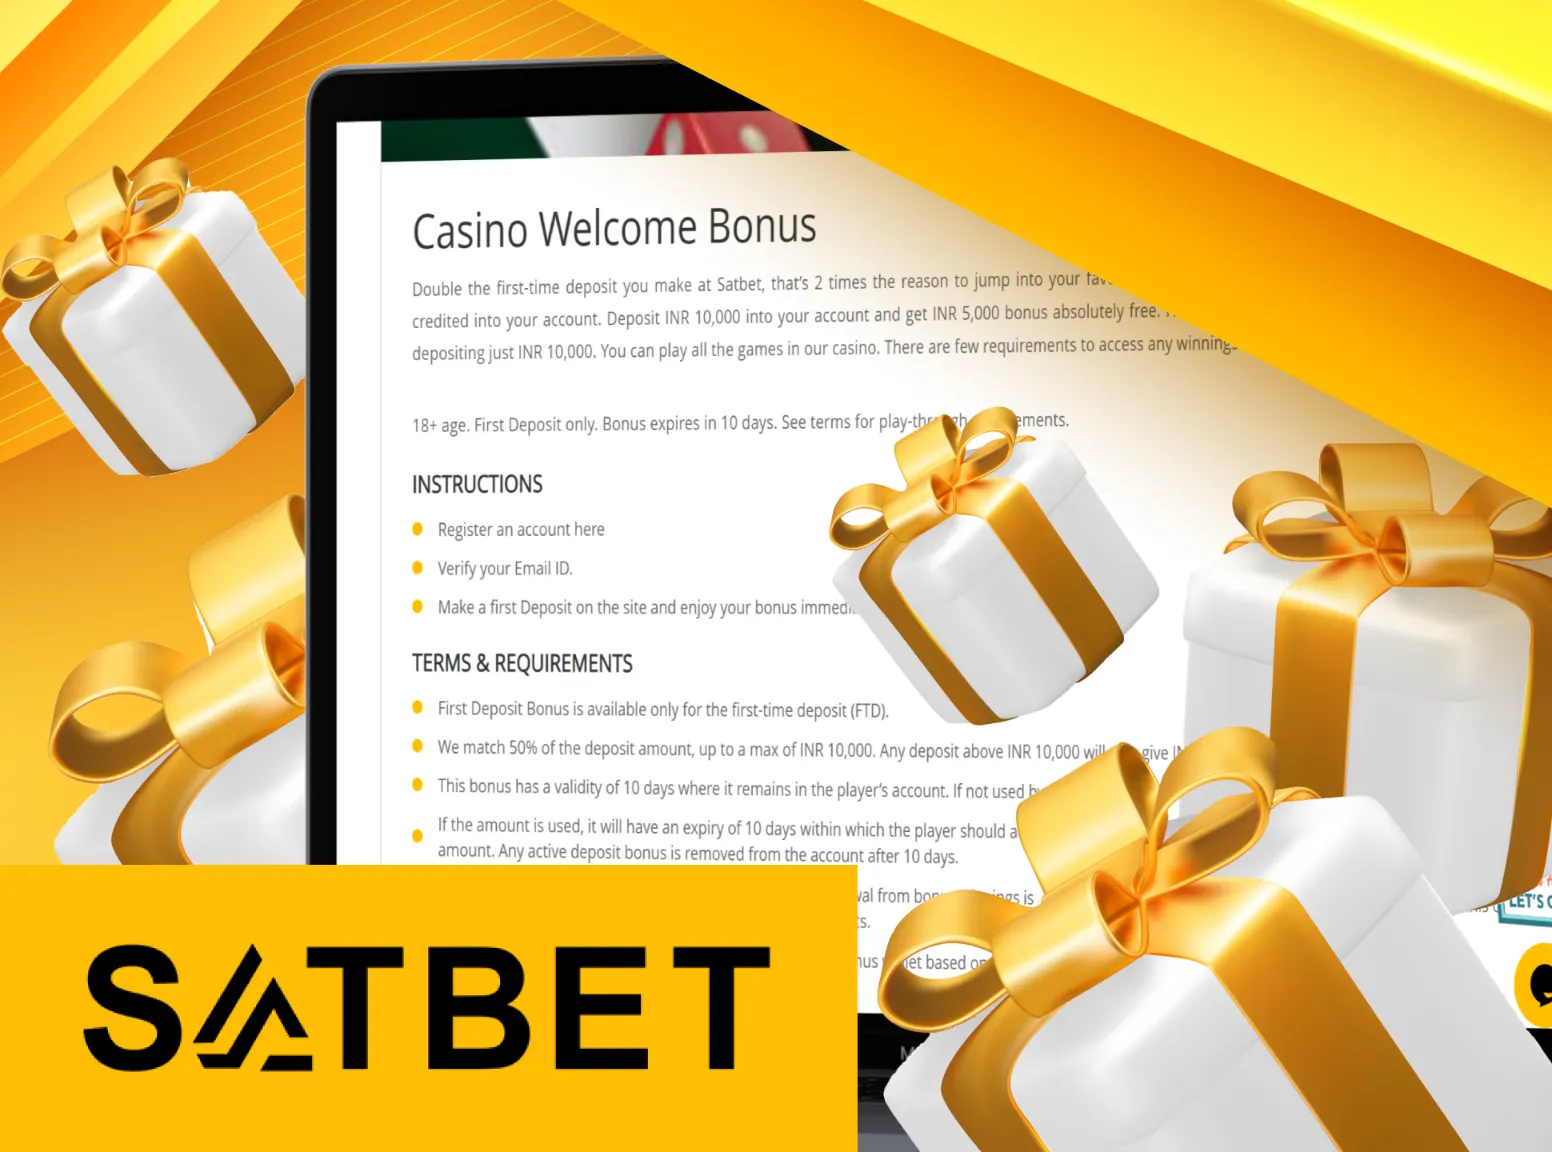 Get your casino bonus by playing casino games at Satbet.